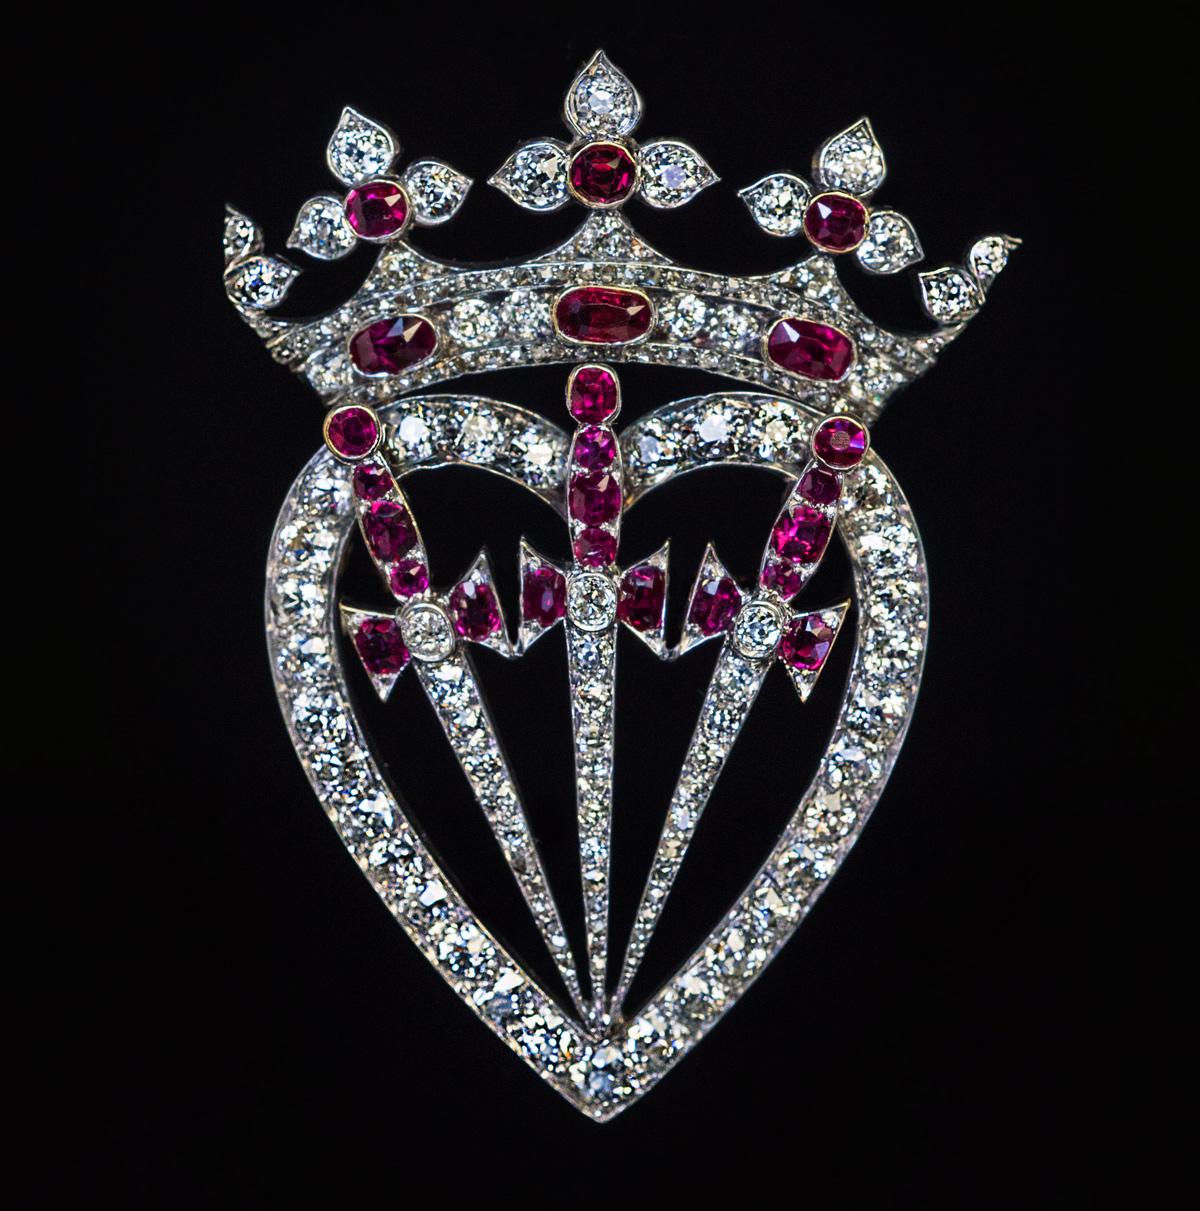 Victorian Antique Crowned Heart Diamond Ruby Symbolic Brooch Pendant